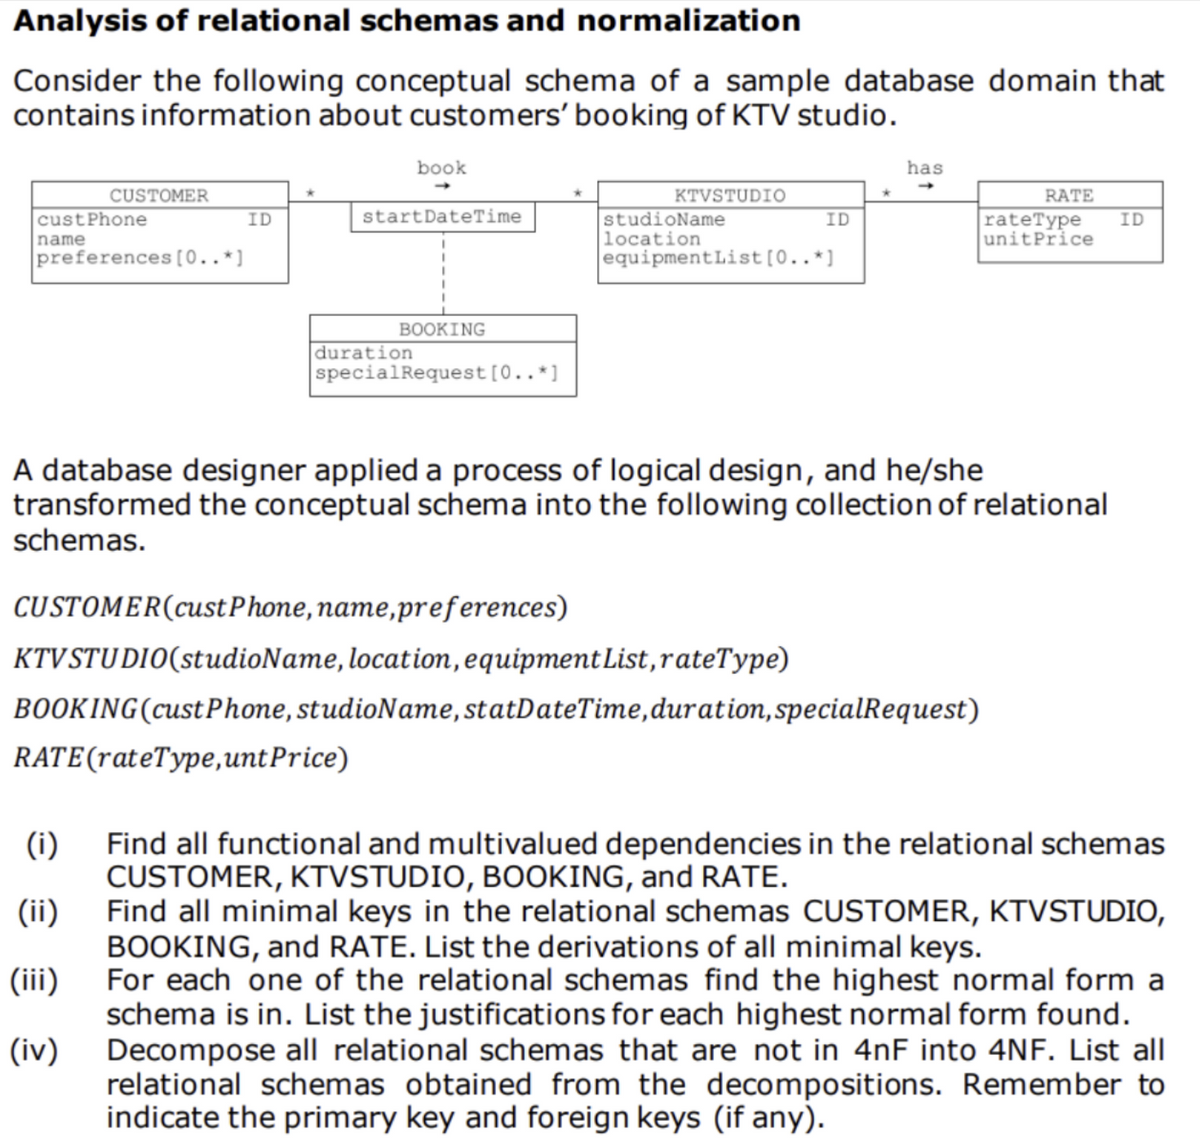 Analysis of relational schemas and normalization
Consider the following conceptual schema of a sample database domain that
contains information about customers' booking of KTV studio.
book
has
CUSTOMER
KTVSTUDIO
studioName
location
equipmentList[0..*]
RATE
startDateTime
rateType
custPhone
name
preferences[0..*]
ID
ID
ID
unitPrice
BOOKING
duration
specialRequest[0..*]
A database designer applied a process of logical design, and he/she
transformed the conceptual schema into the following collection of relational
schemas.
CUSTOMER(cust Phone, name,preferences)
KTVSTUDIO(studioName, location,equipment List, rateType)
BOOKING(custPhone, studioName, statDateTime,duration,specialRequest)
RATE(rateType,unt Price)
(i)
Find all functional and multivalued dependencies in the relational schemas
CUSTOMER, KTVSTUDIO, BOKING, and RATE.
Find all minimal keys in the relational schemas CUSTOMER, KTVSTUDIO,
BOOKING, and RATE. List the derivations of all minimal keys.
For each one of the relational schemas find the highest normal form a
schema is in. List the justifications for each highest normal form found.
Decompose all relational schemas that are not in 4nF into 4NF. List all
relational schemas obtained from the decompositions. Remember to
indicate the primary key and foreign keys (if any).
(ii)
(iii)
(iv)
